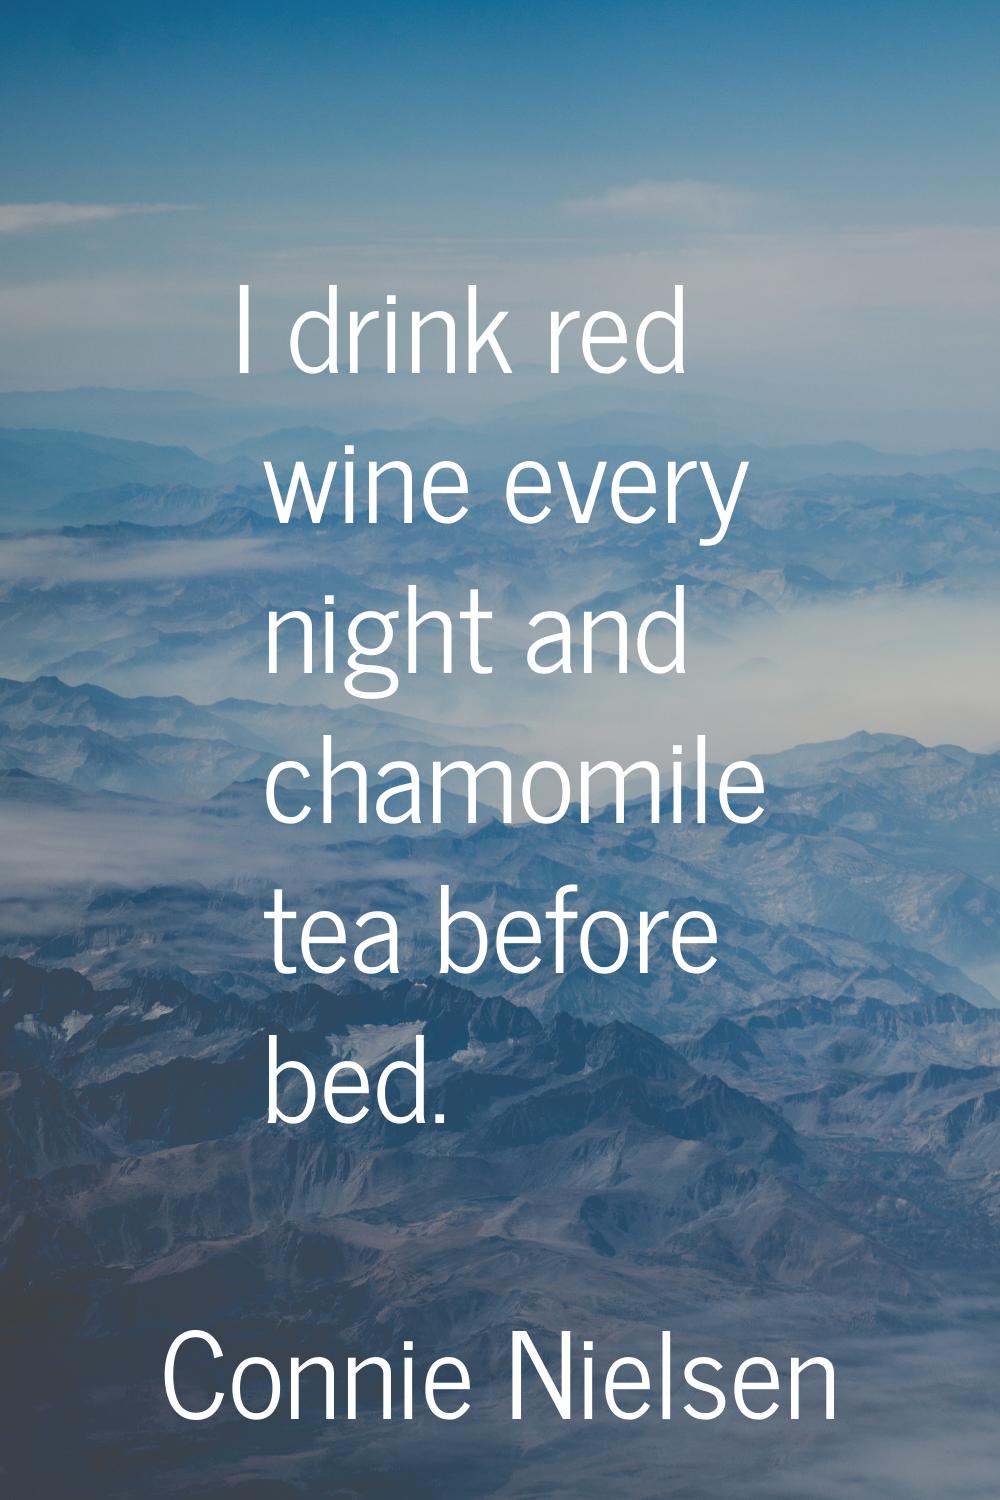 I drink red wine every night and chamomile tea before bed.